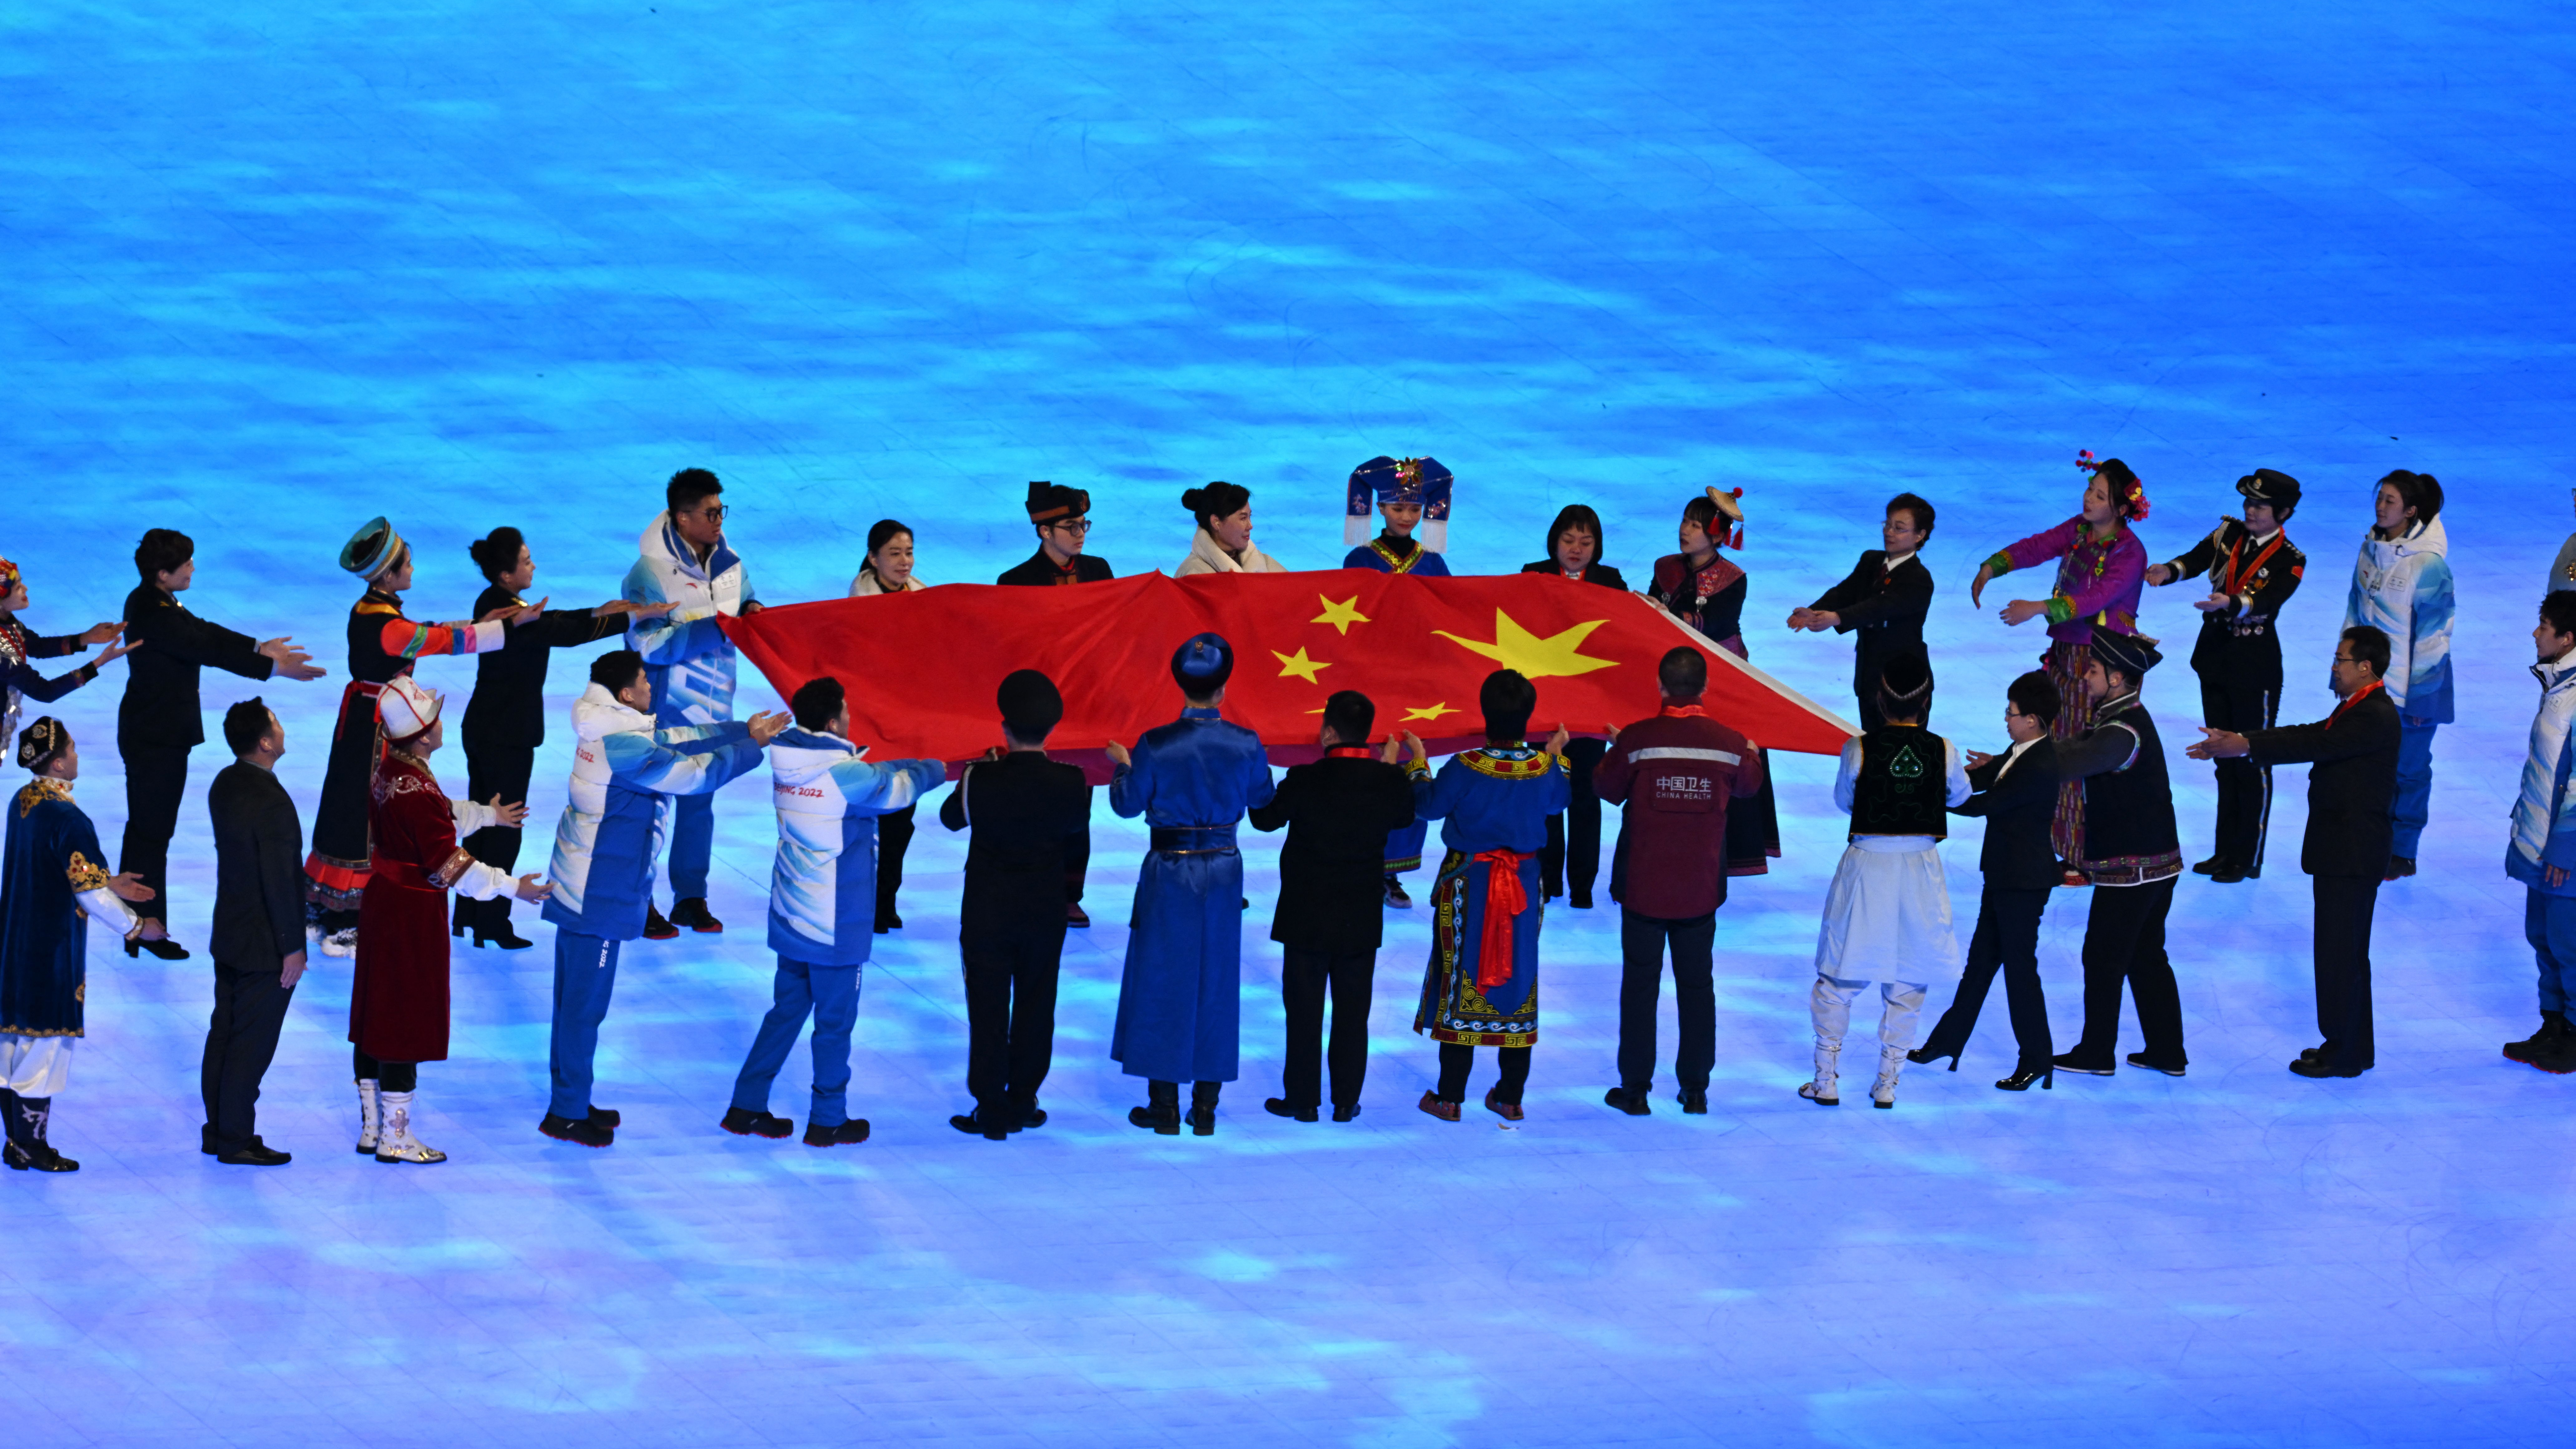 China's Provocation at the Olympic Opening Ceremonies